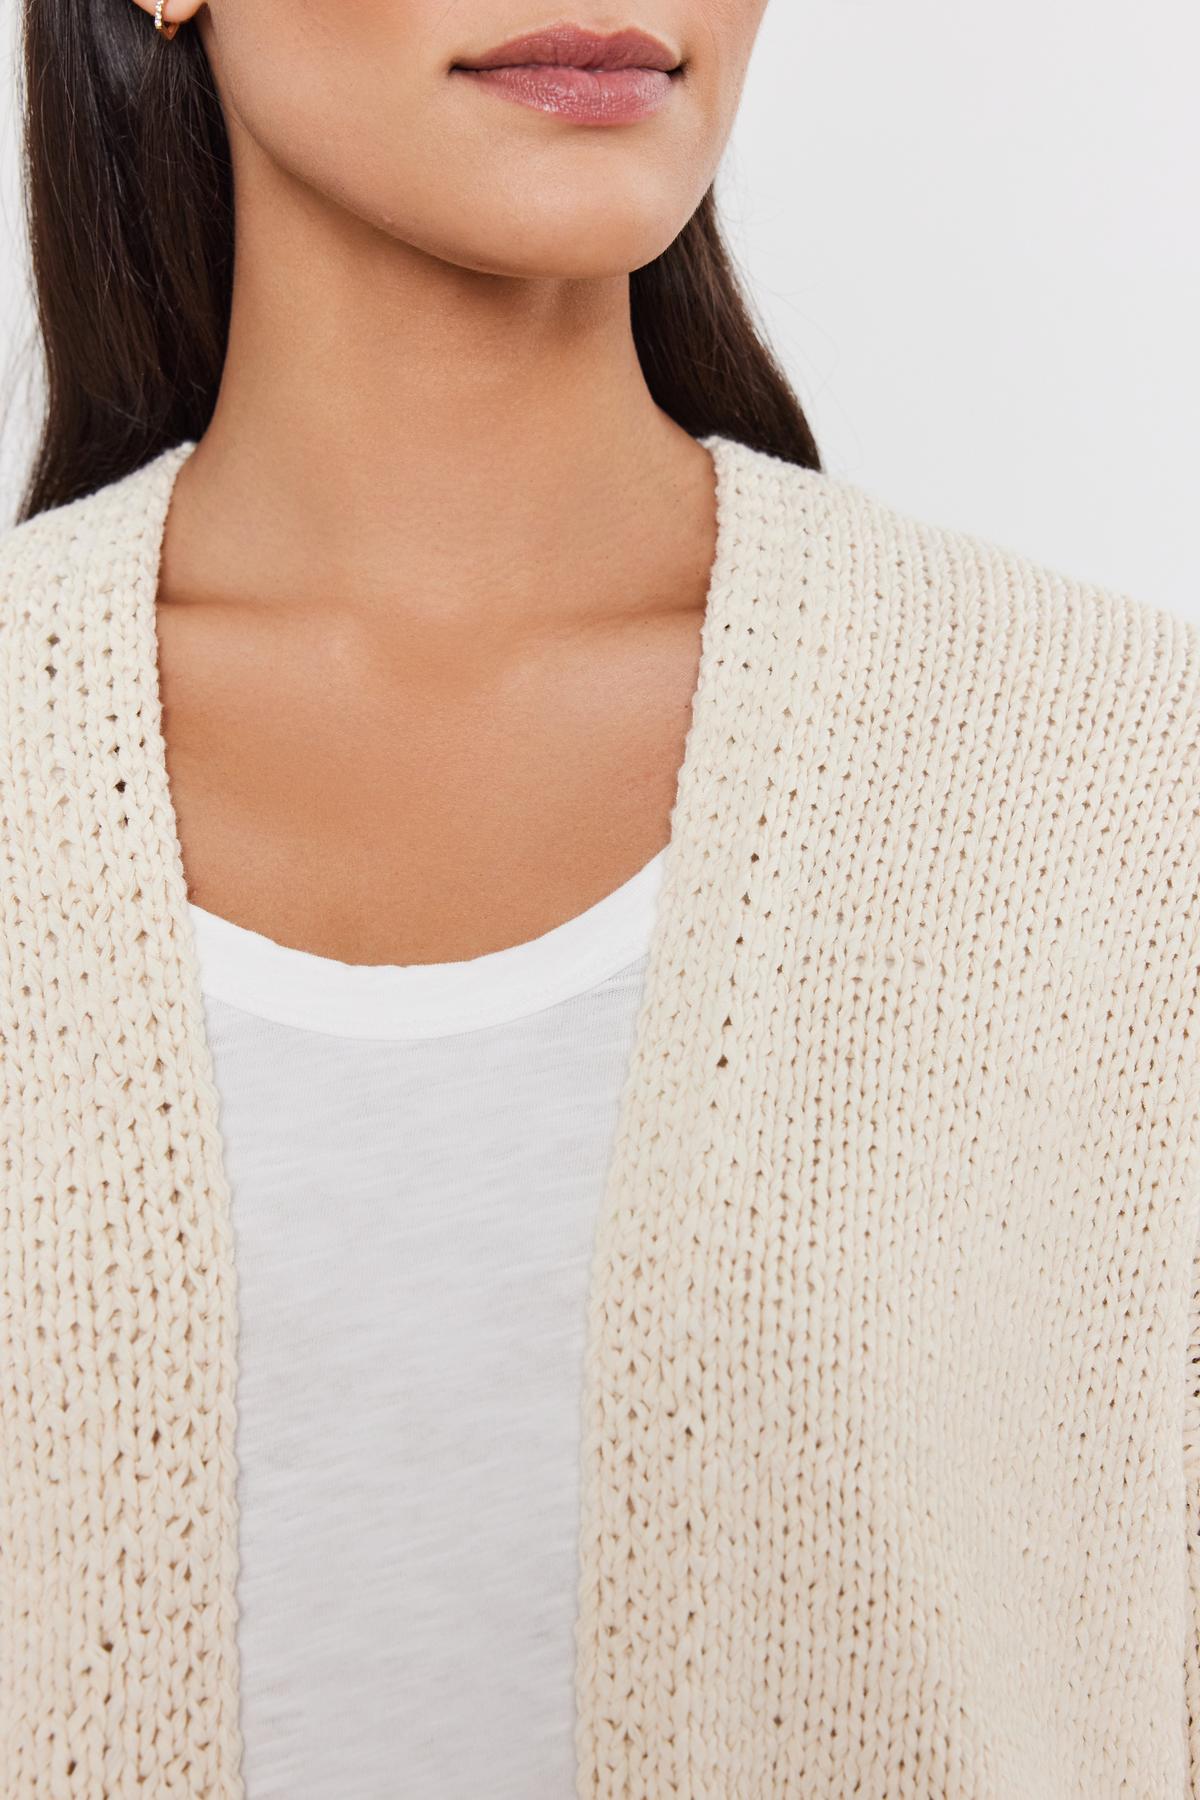   Close-up of a woman wearing a Velvet by Graham & Spencer HOLLIE CARDIGAN over a white top, focusing on the neckline area. 